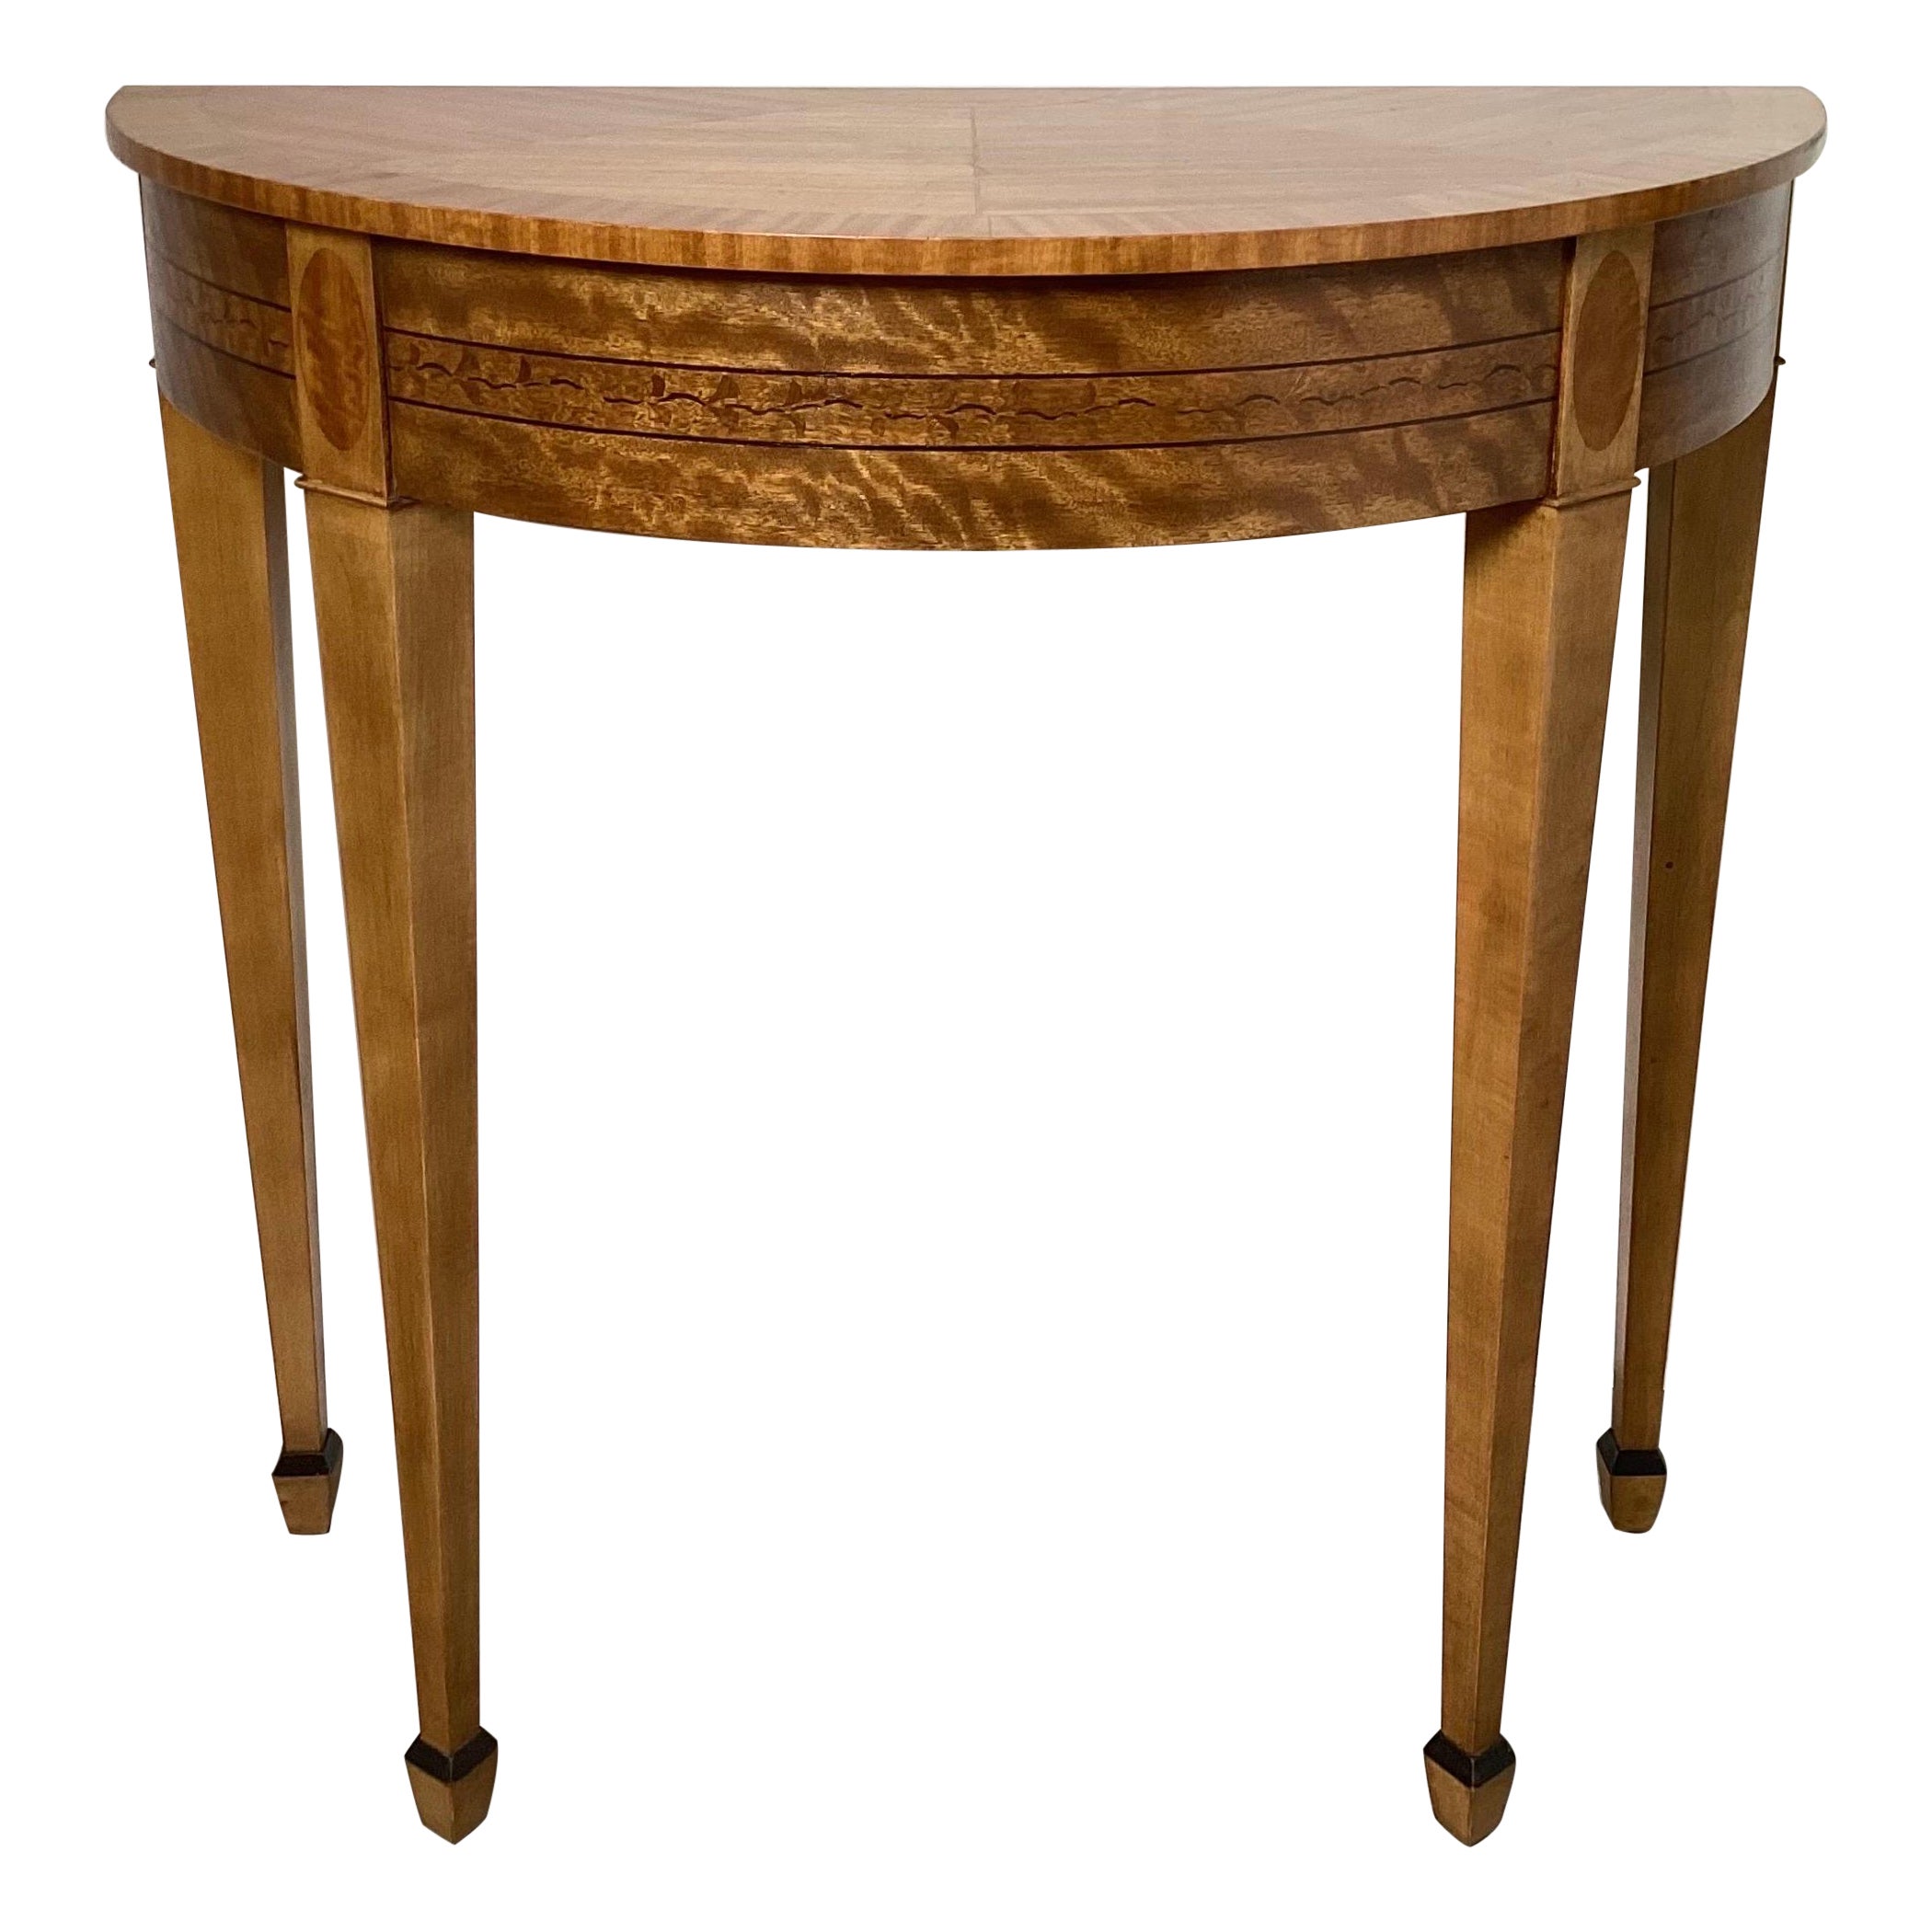 Inlaid Demi-lune Table by Baker for Laura Ashley